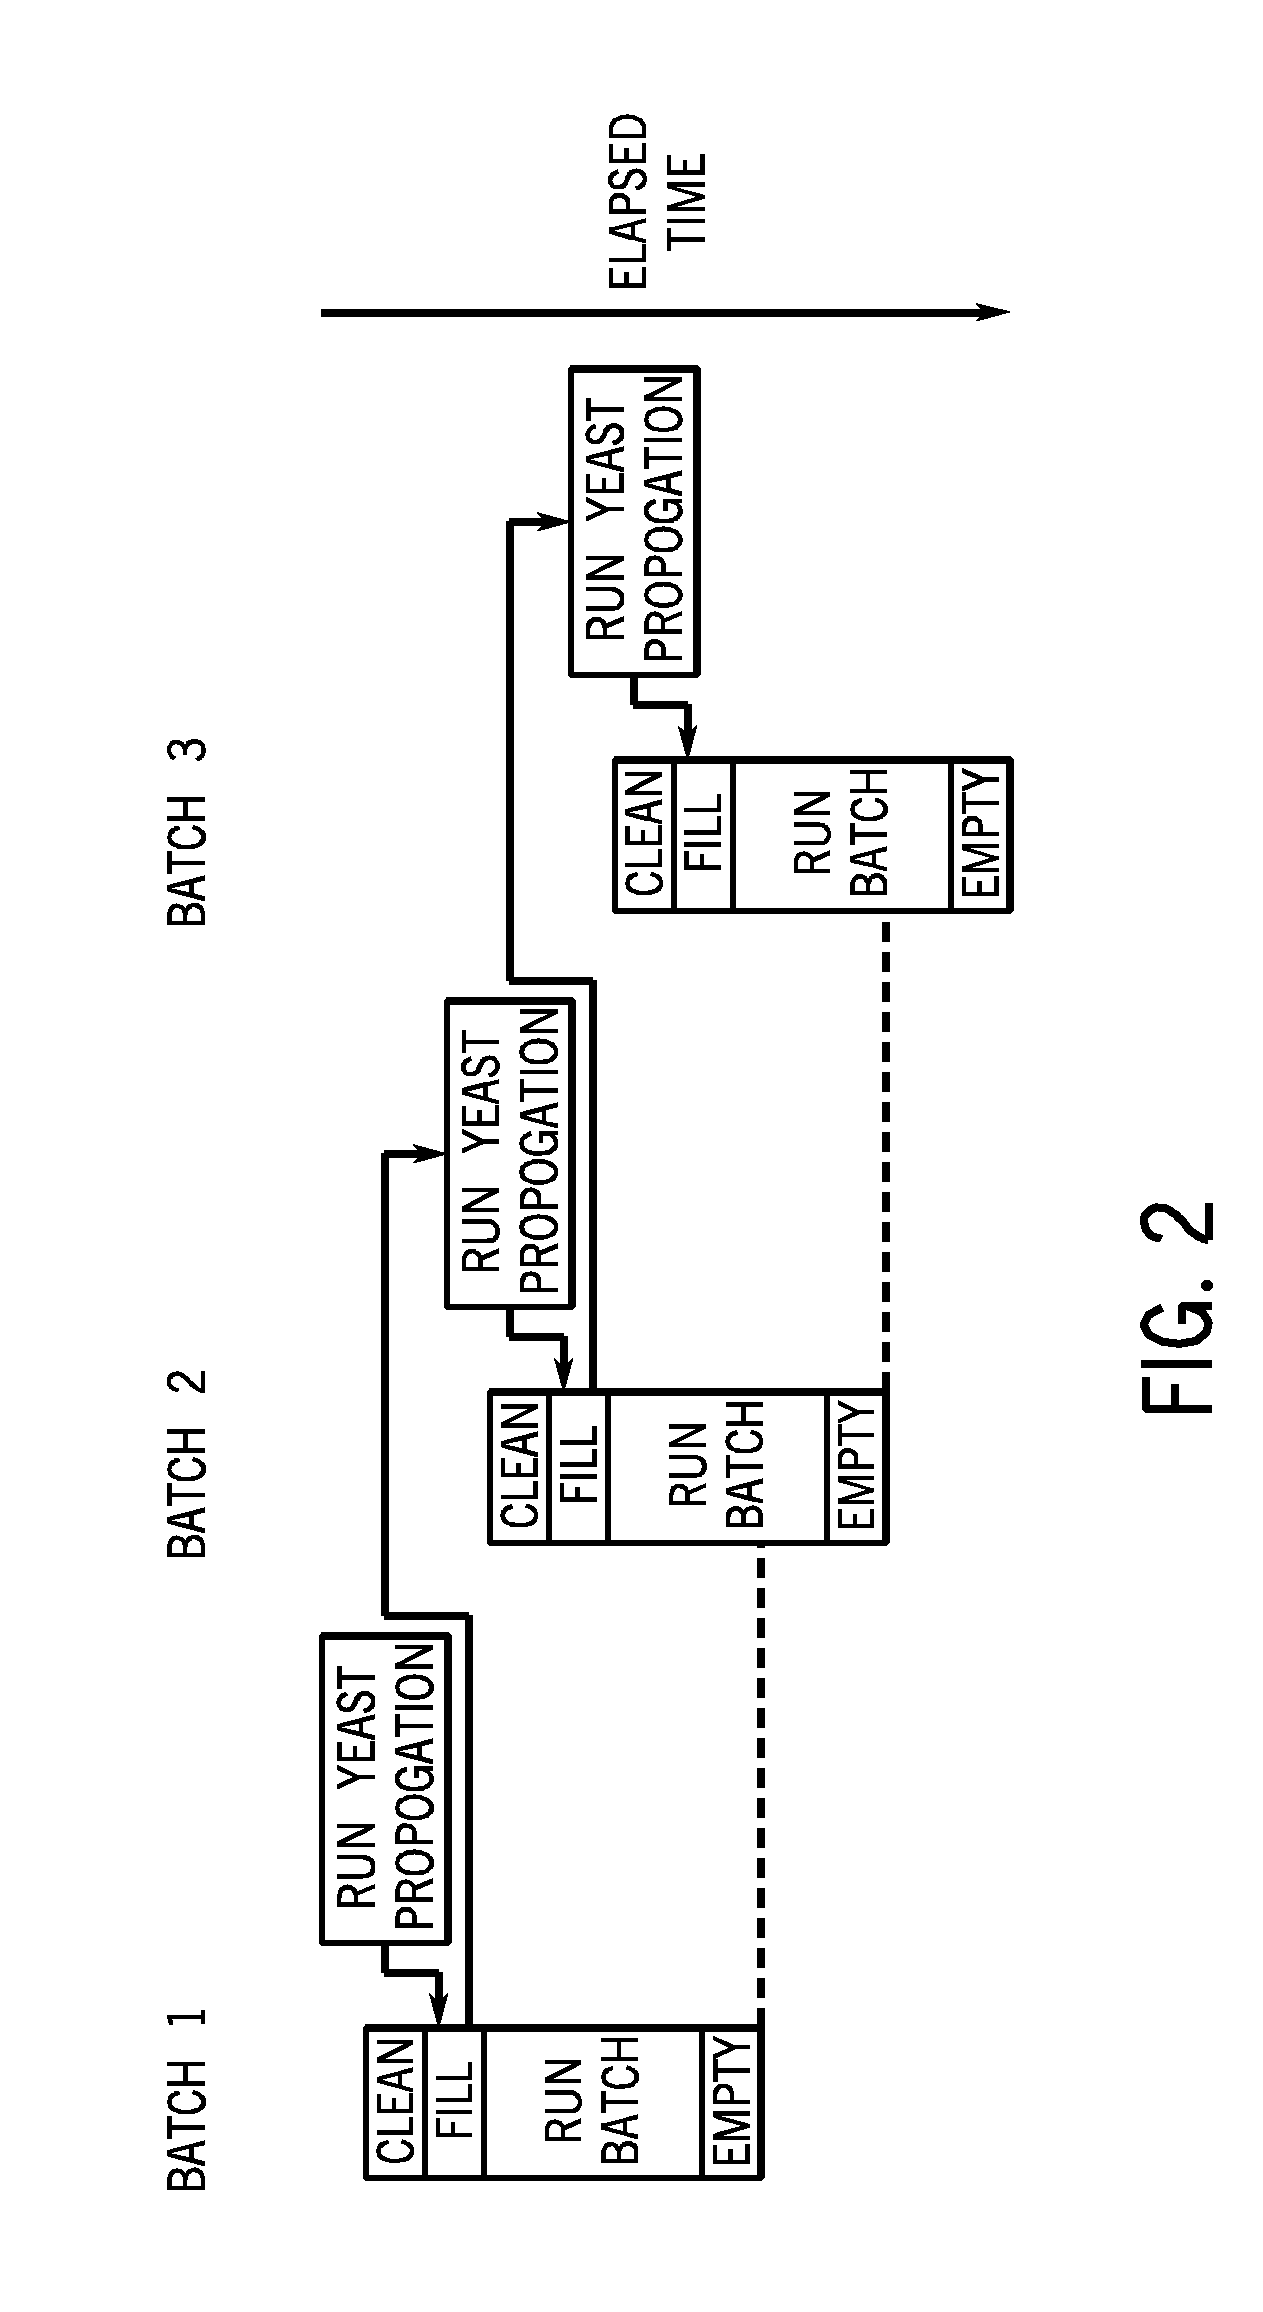 Nonlinear model predictive control of a batch reaction system